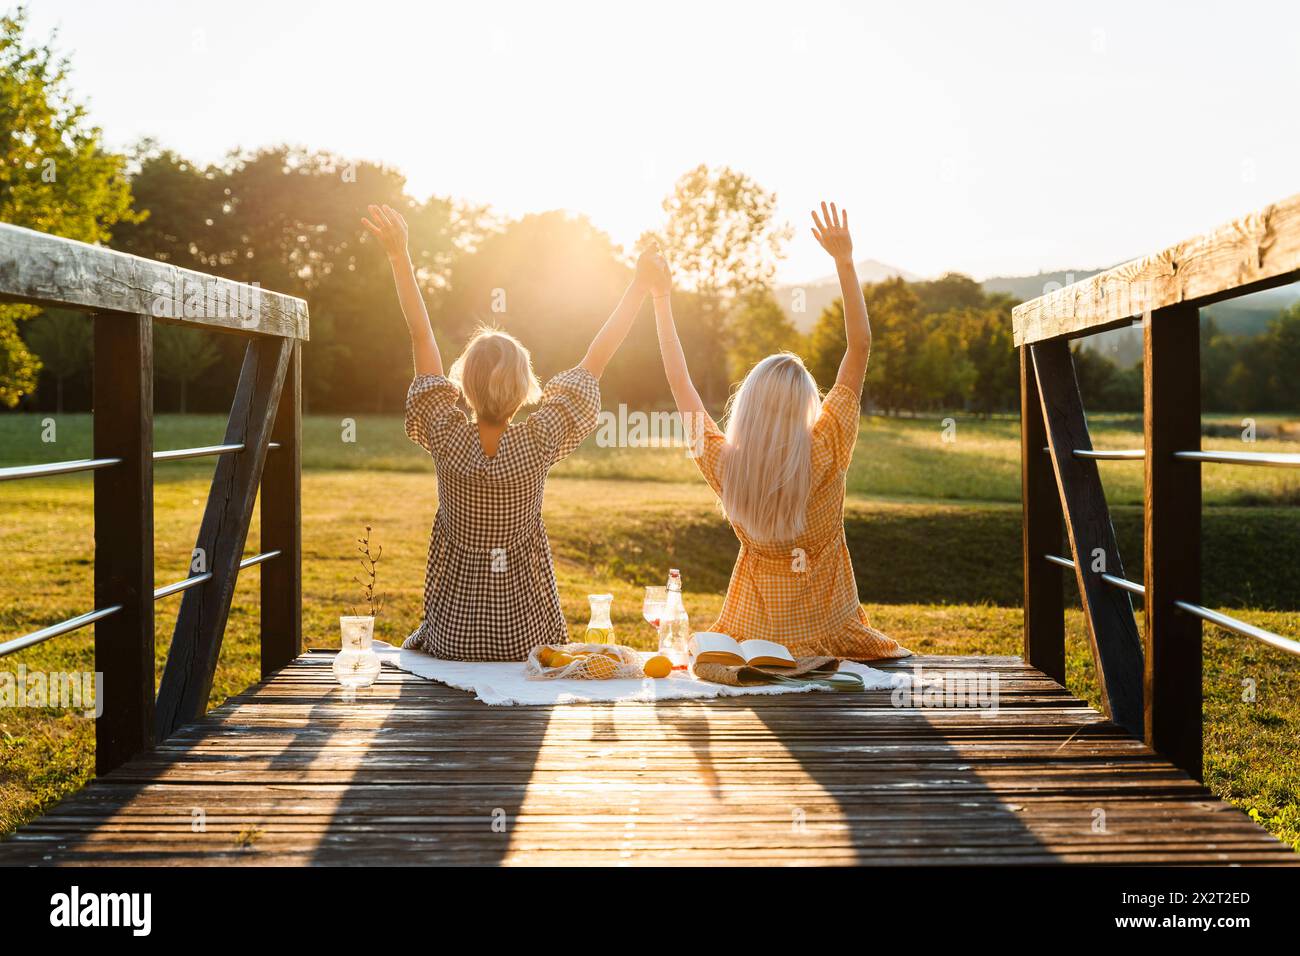 Friends with arms raised sitting on boardwalk in park Stock Photo